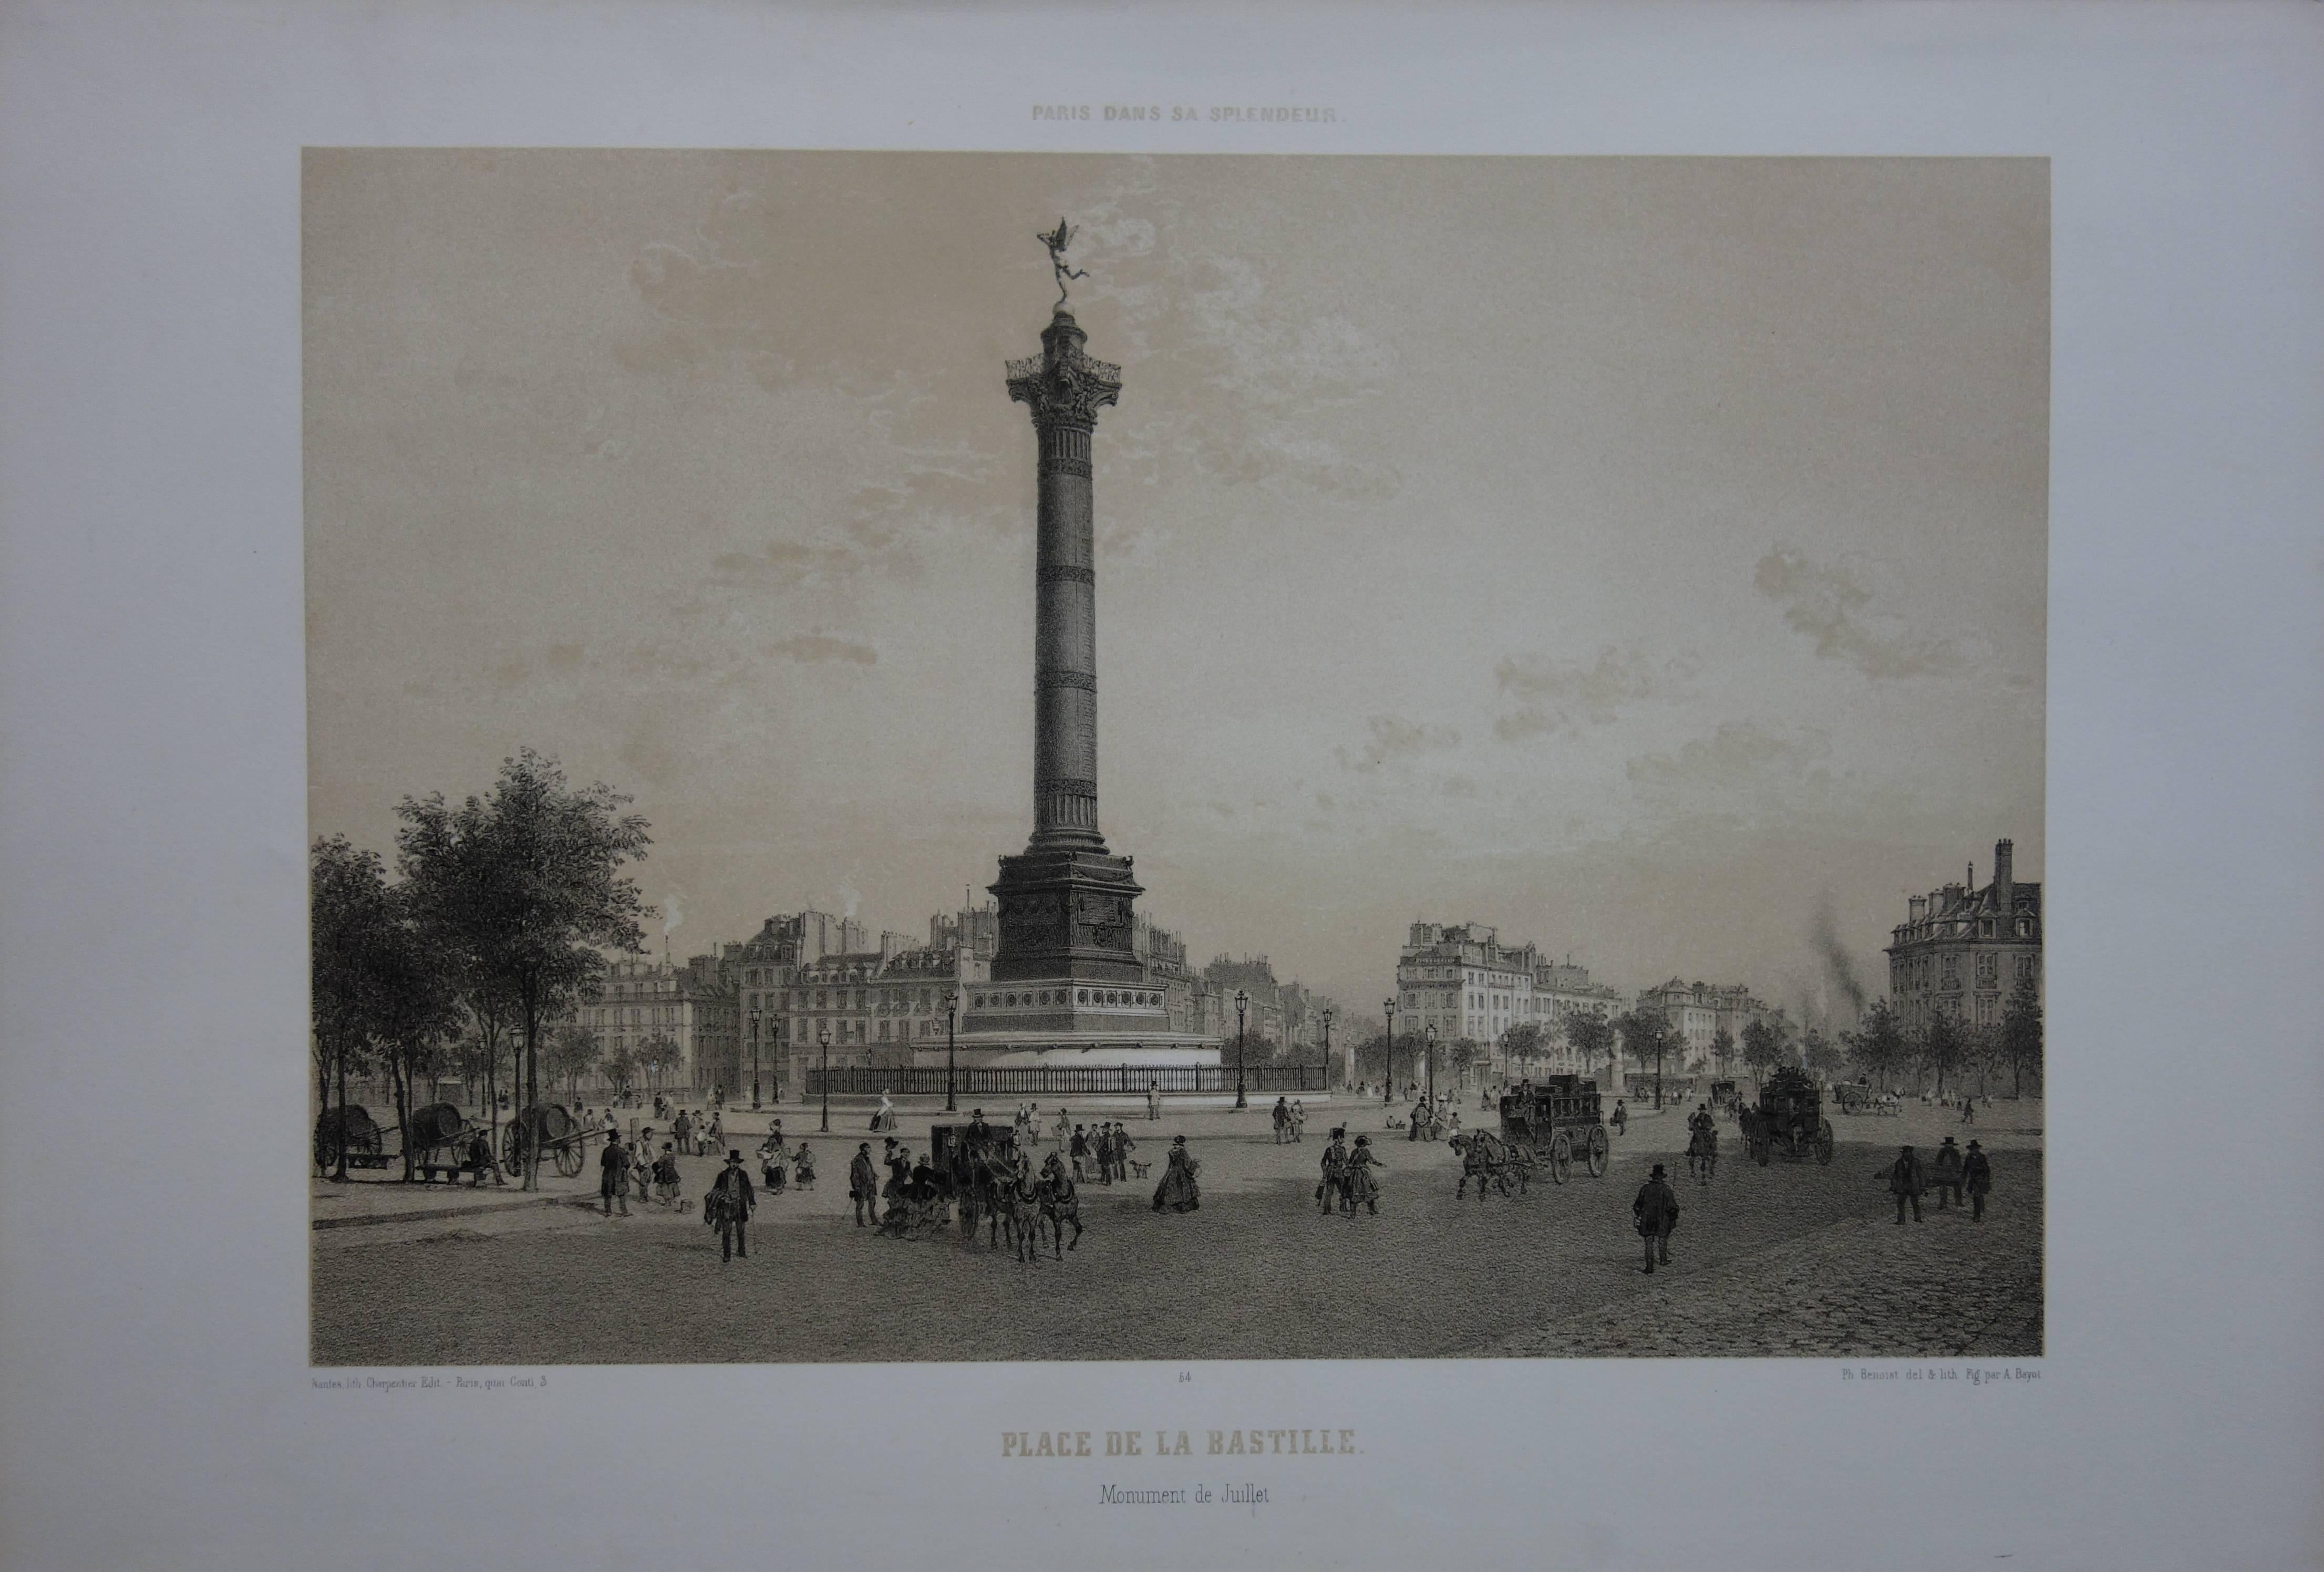 Paris : The Column with an Angel on Bastille Square - Original stone lithograph  - Print by  Philippe Benoist